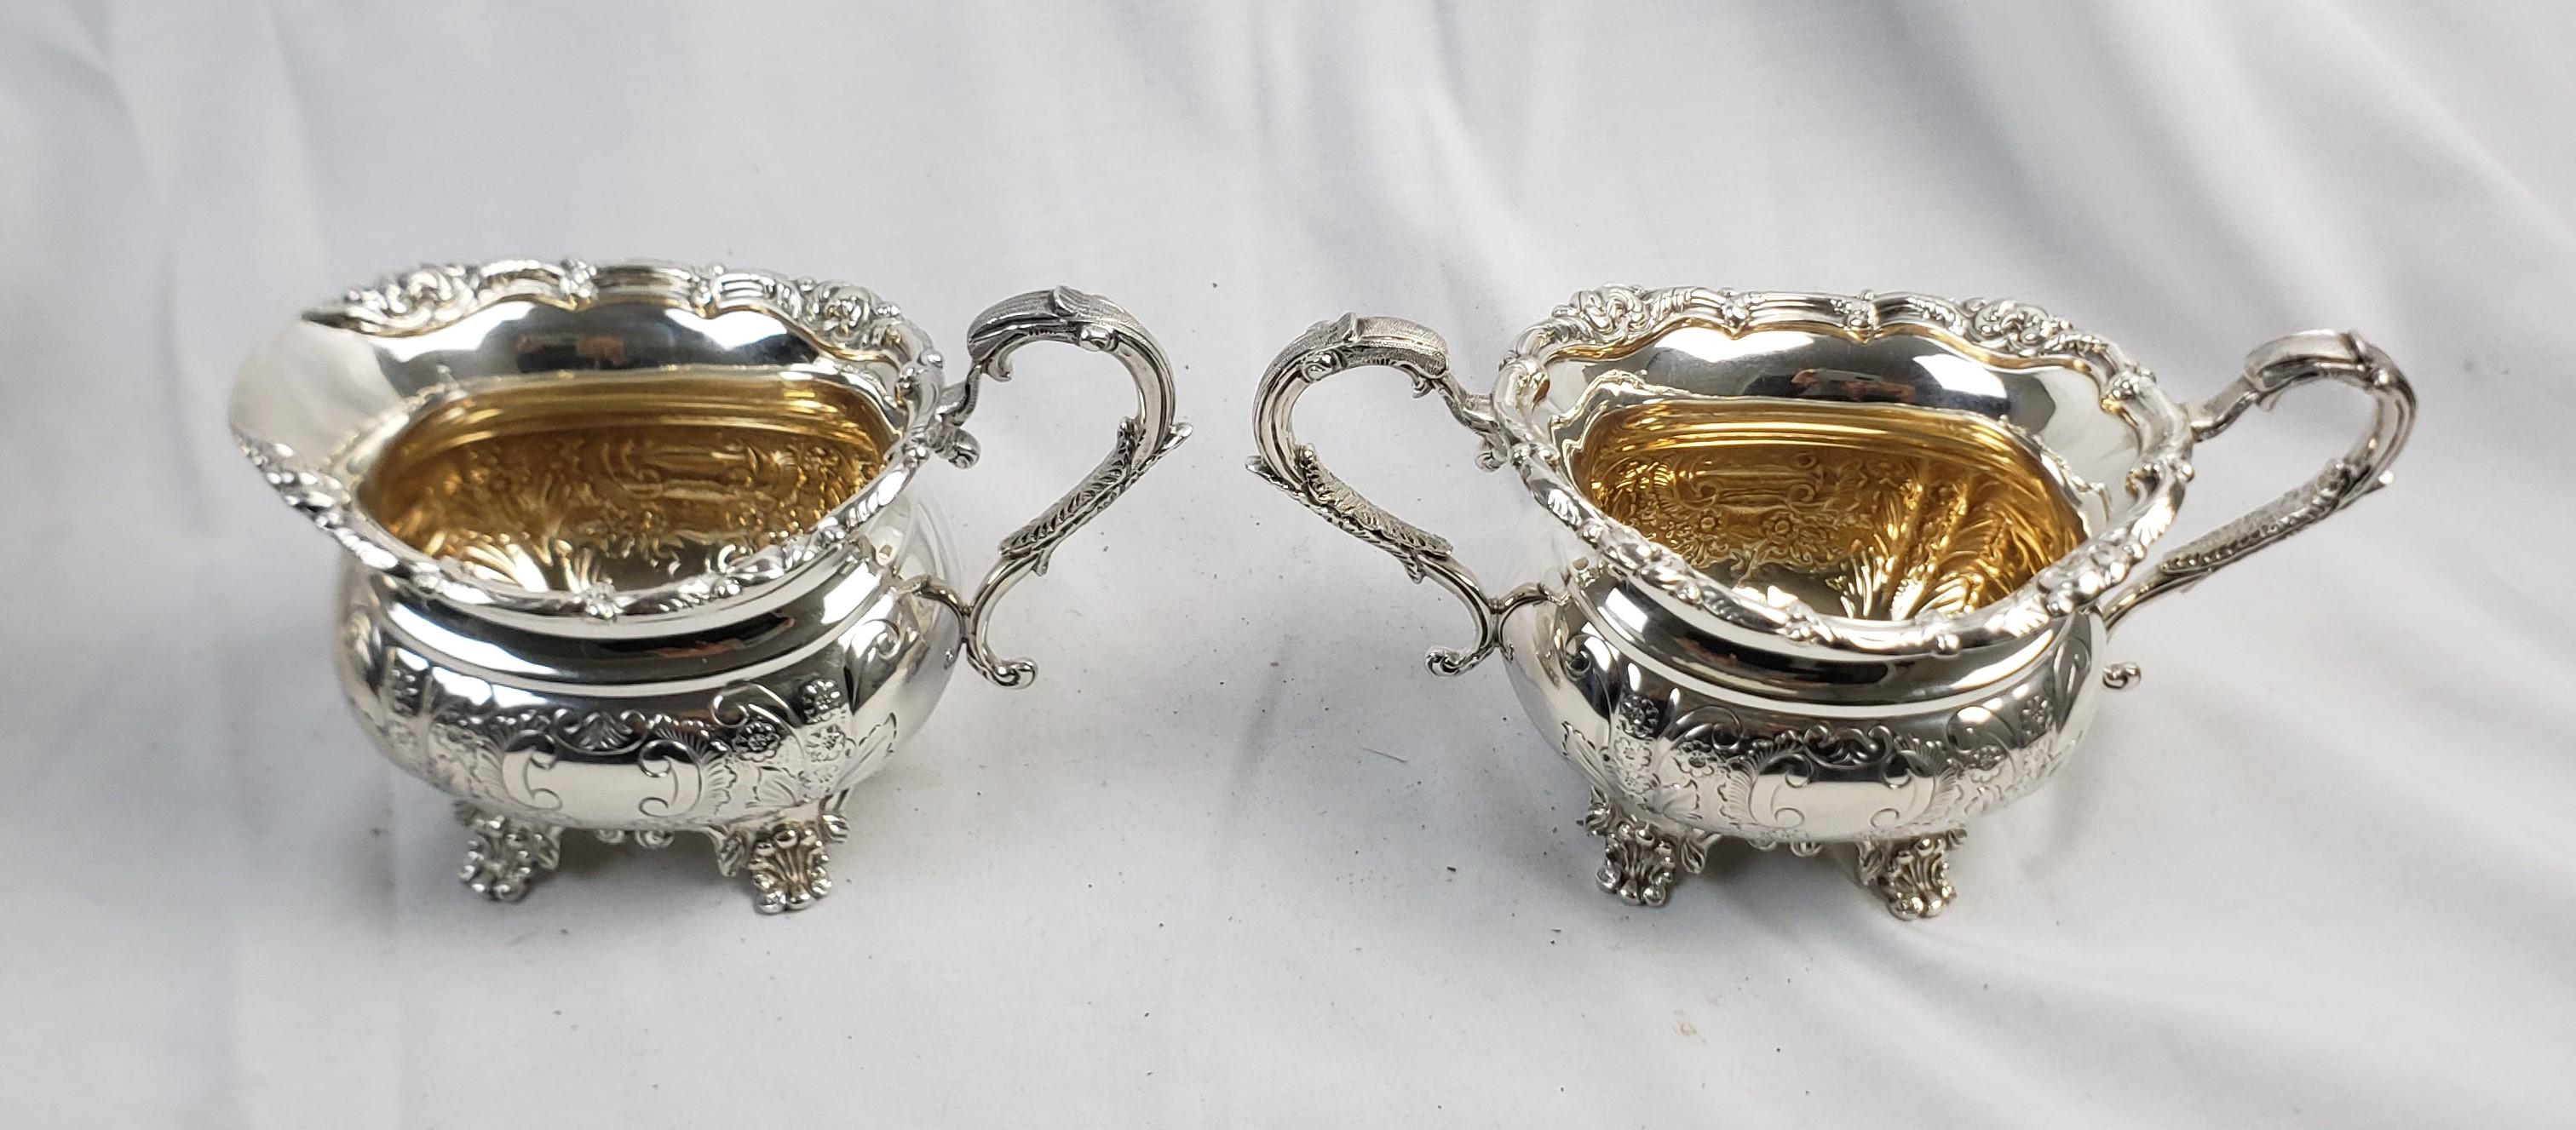 Antique English Sterling Silver Tea Set on Huge Silver Plated Serving Tray For Sale 1